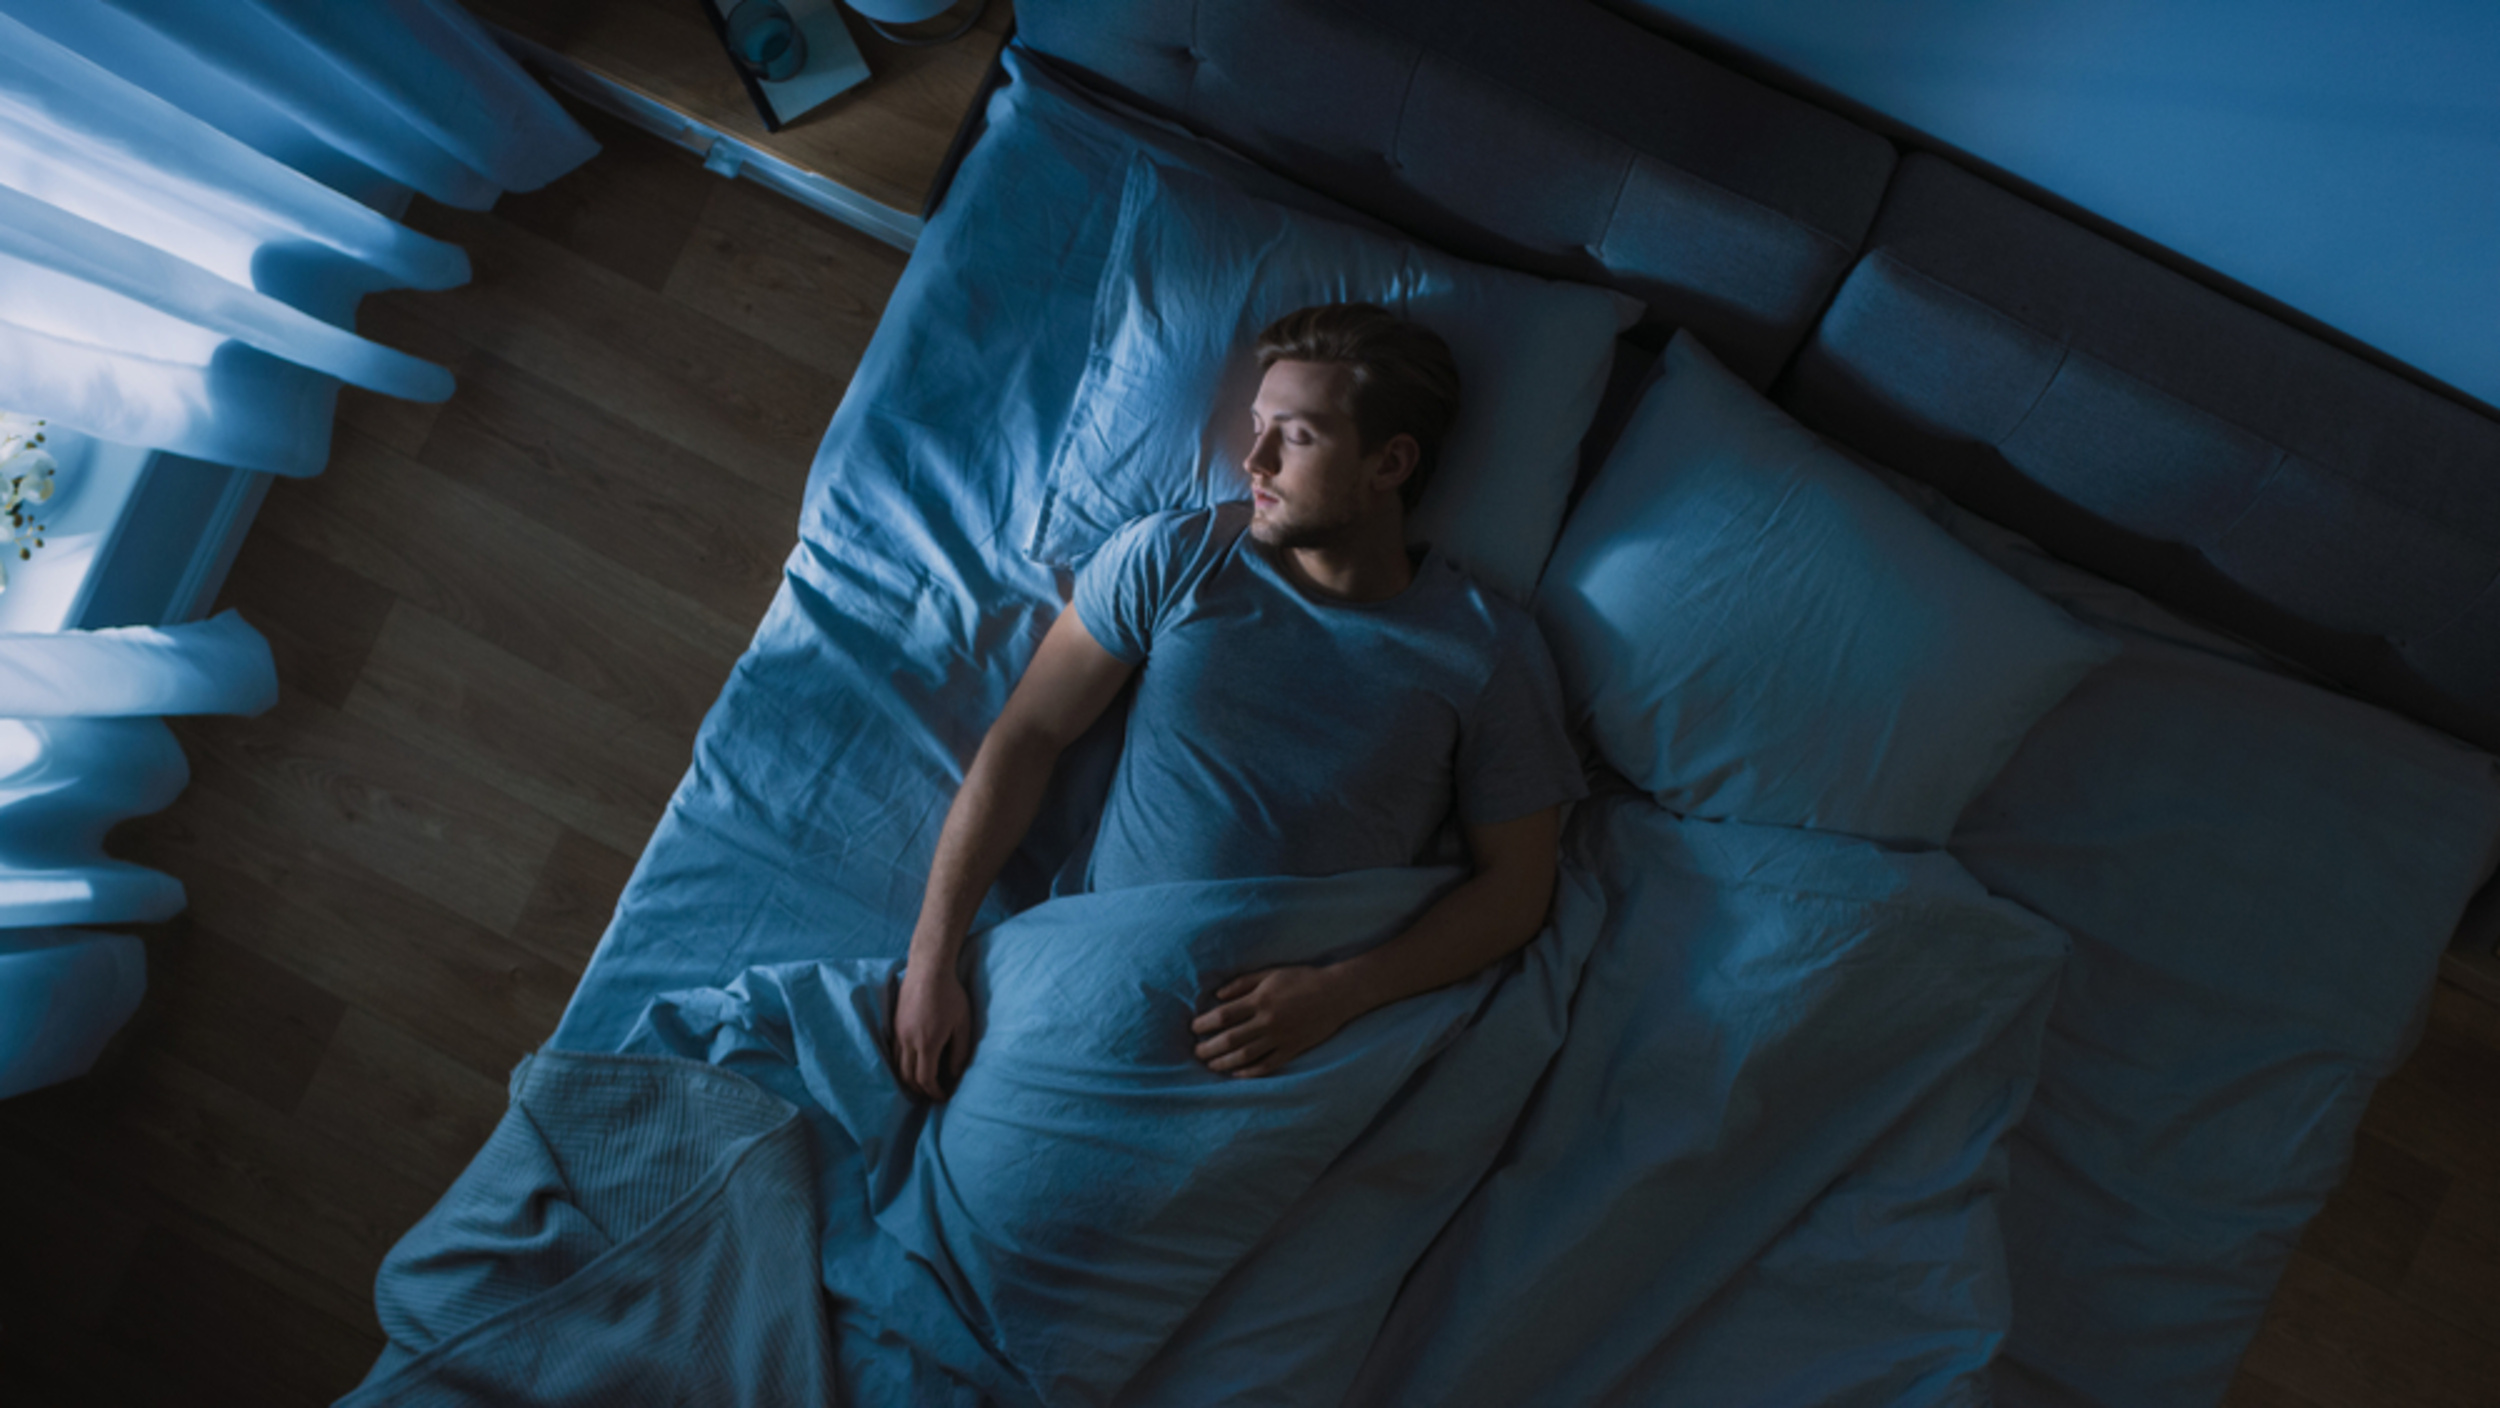 <p>Sleep and mental health are heavily connected, and being sleep-deprived can leave you frazzled and stressed. If you're having trouble getting enough sleep, consider seeing a doctor or psychiatrist who can help address the root of the problem. </p><p>You may also like: <a href='https://www.yardbarker.com/lifestyle/articles/20_spinach_recipes_you_absolutely_must_try_122323/s1__39117830'>20 spinach recipes you absolutely must try</a></p>